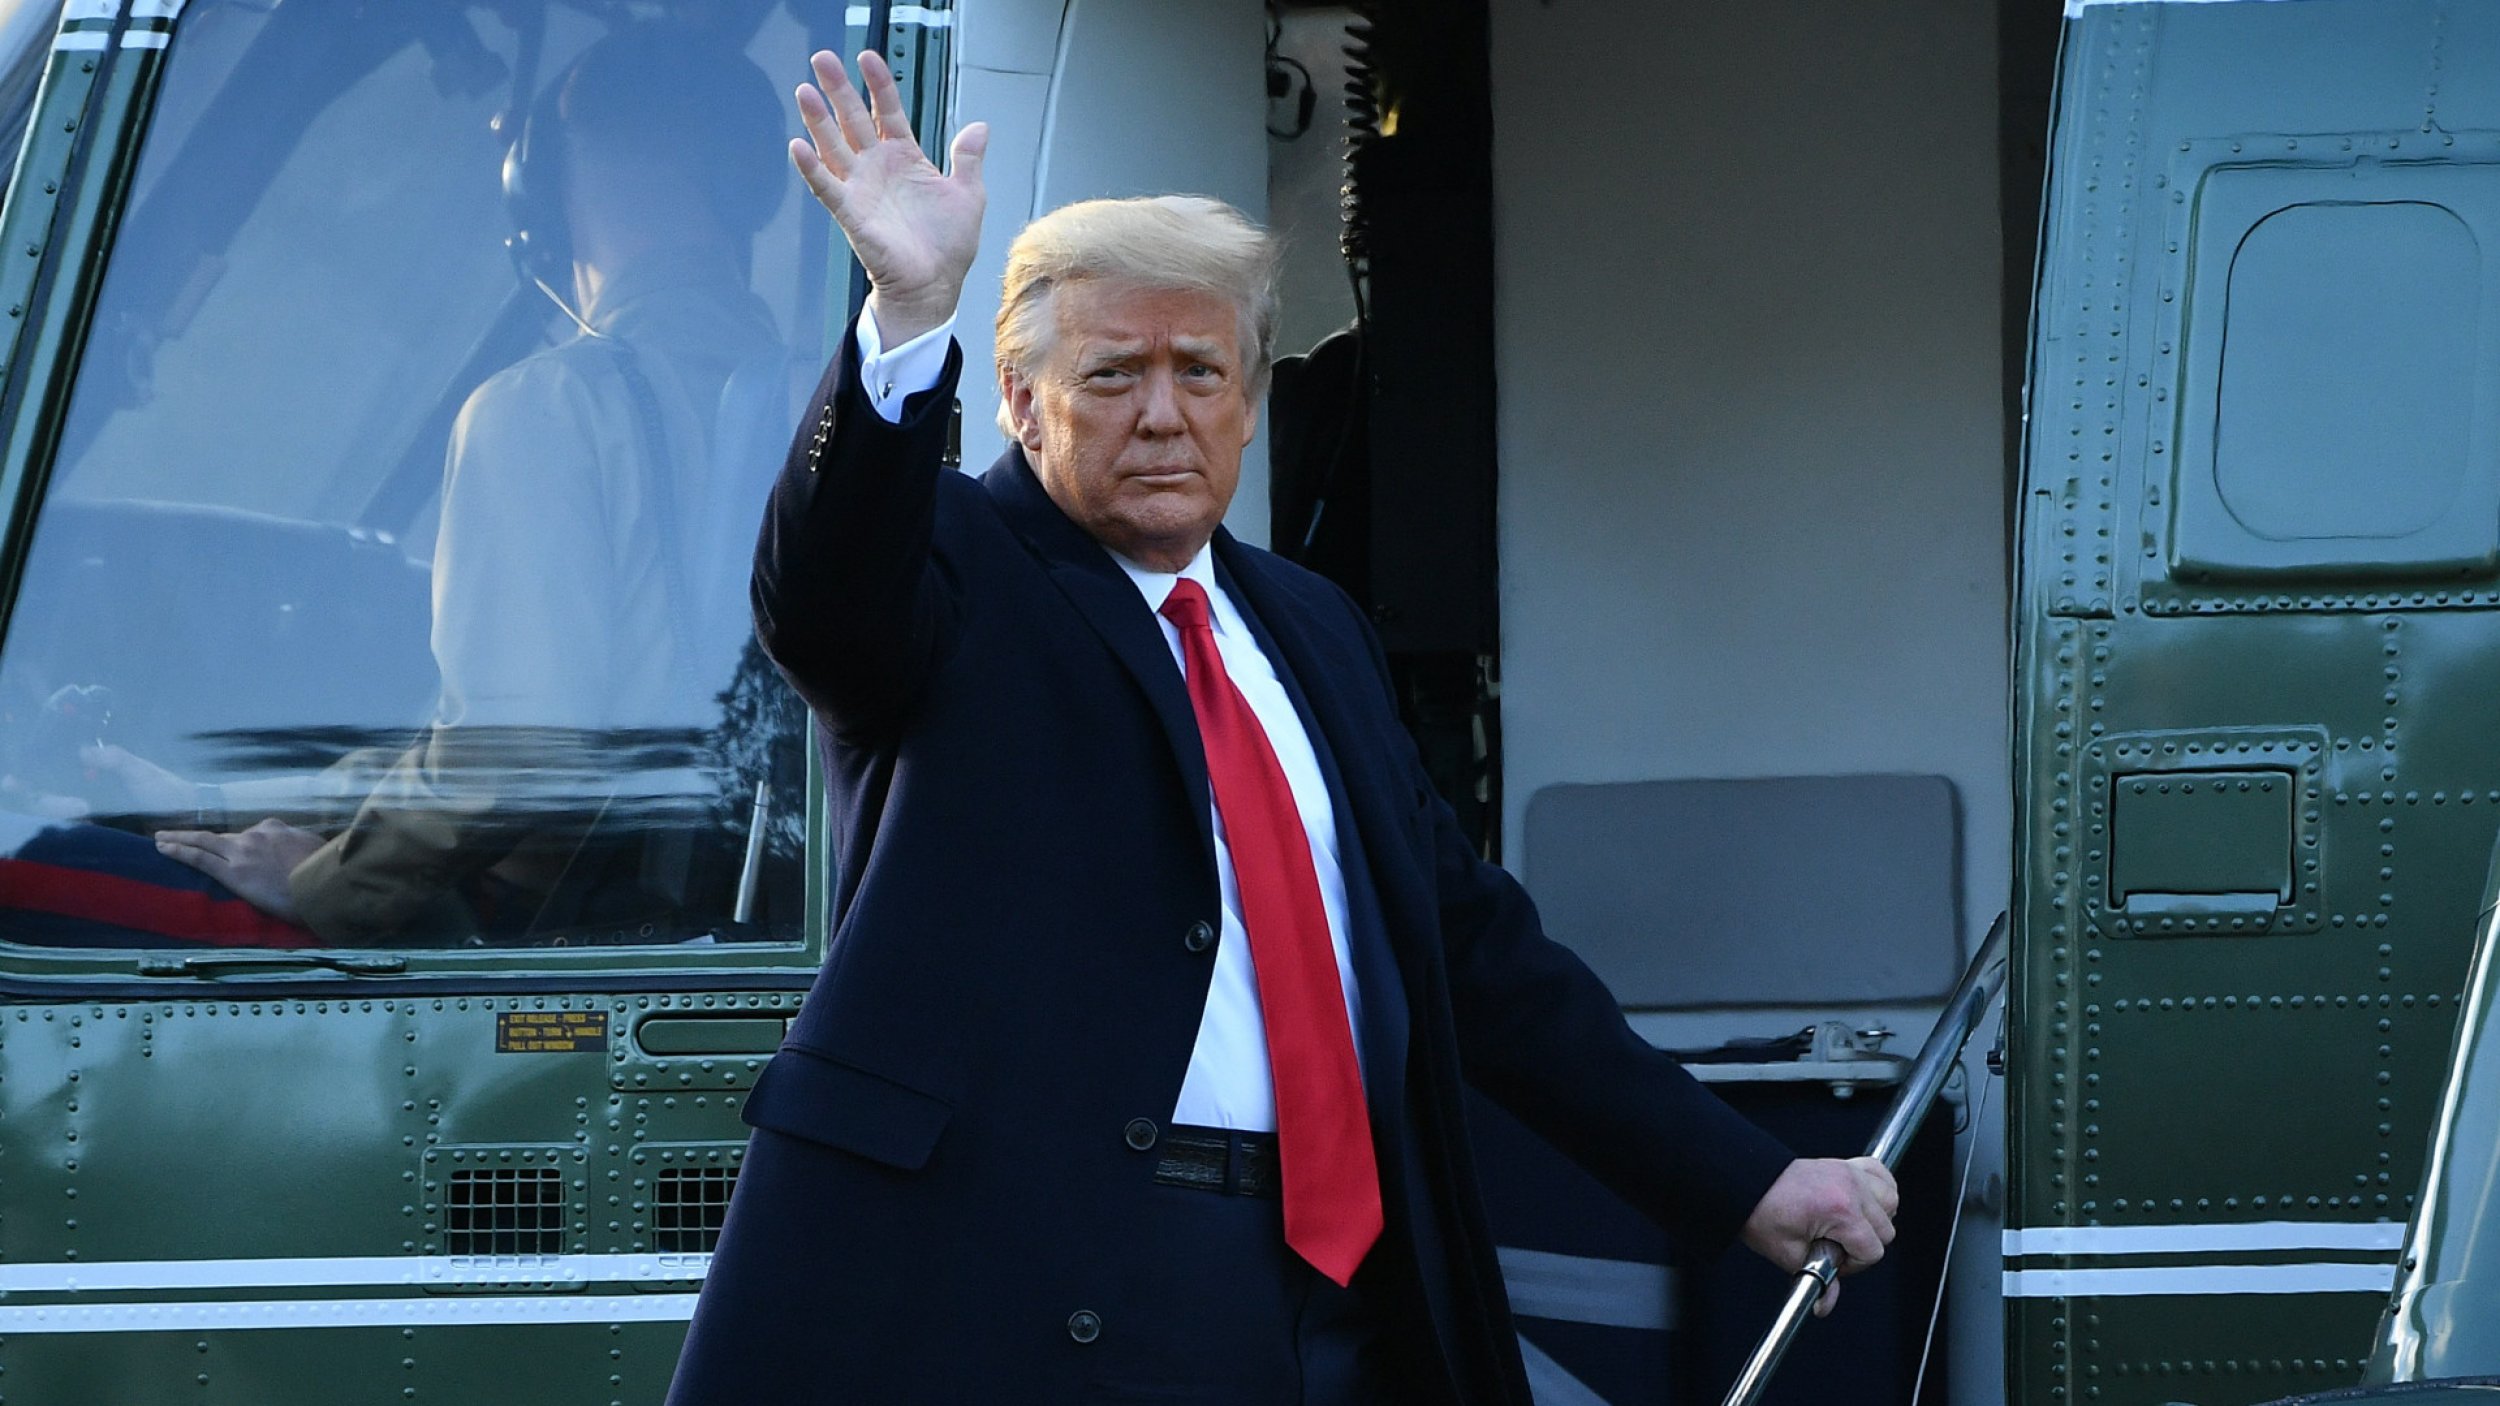 Donald Trump Departs White House For The Last Time As U.S. President